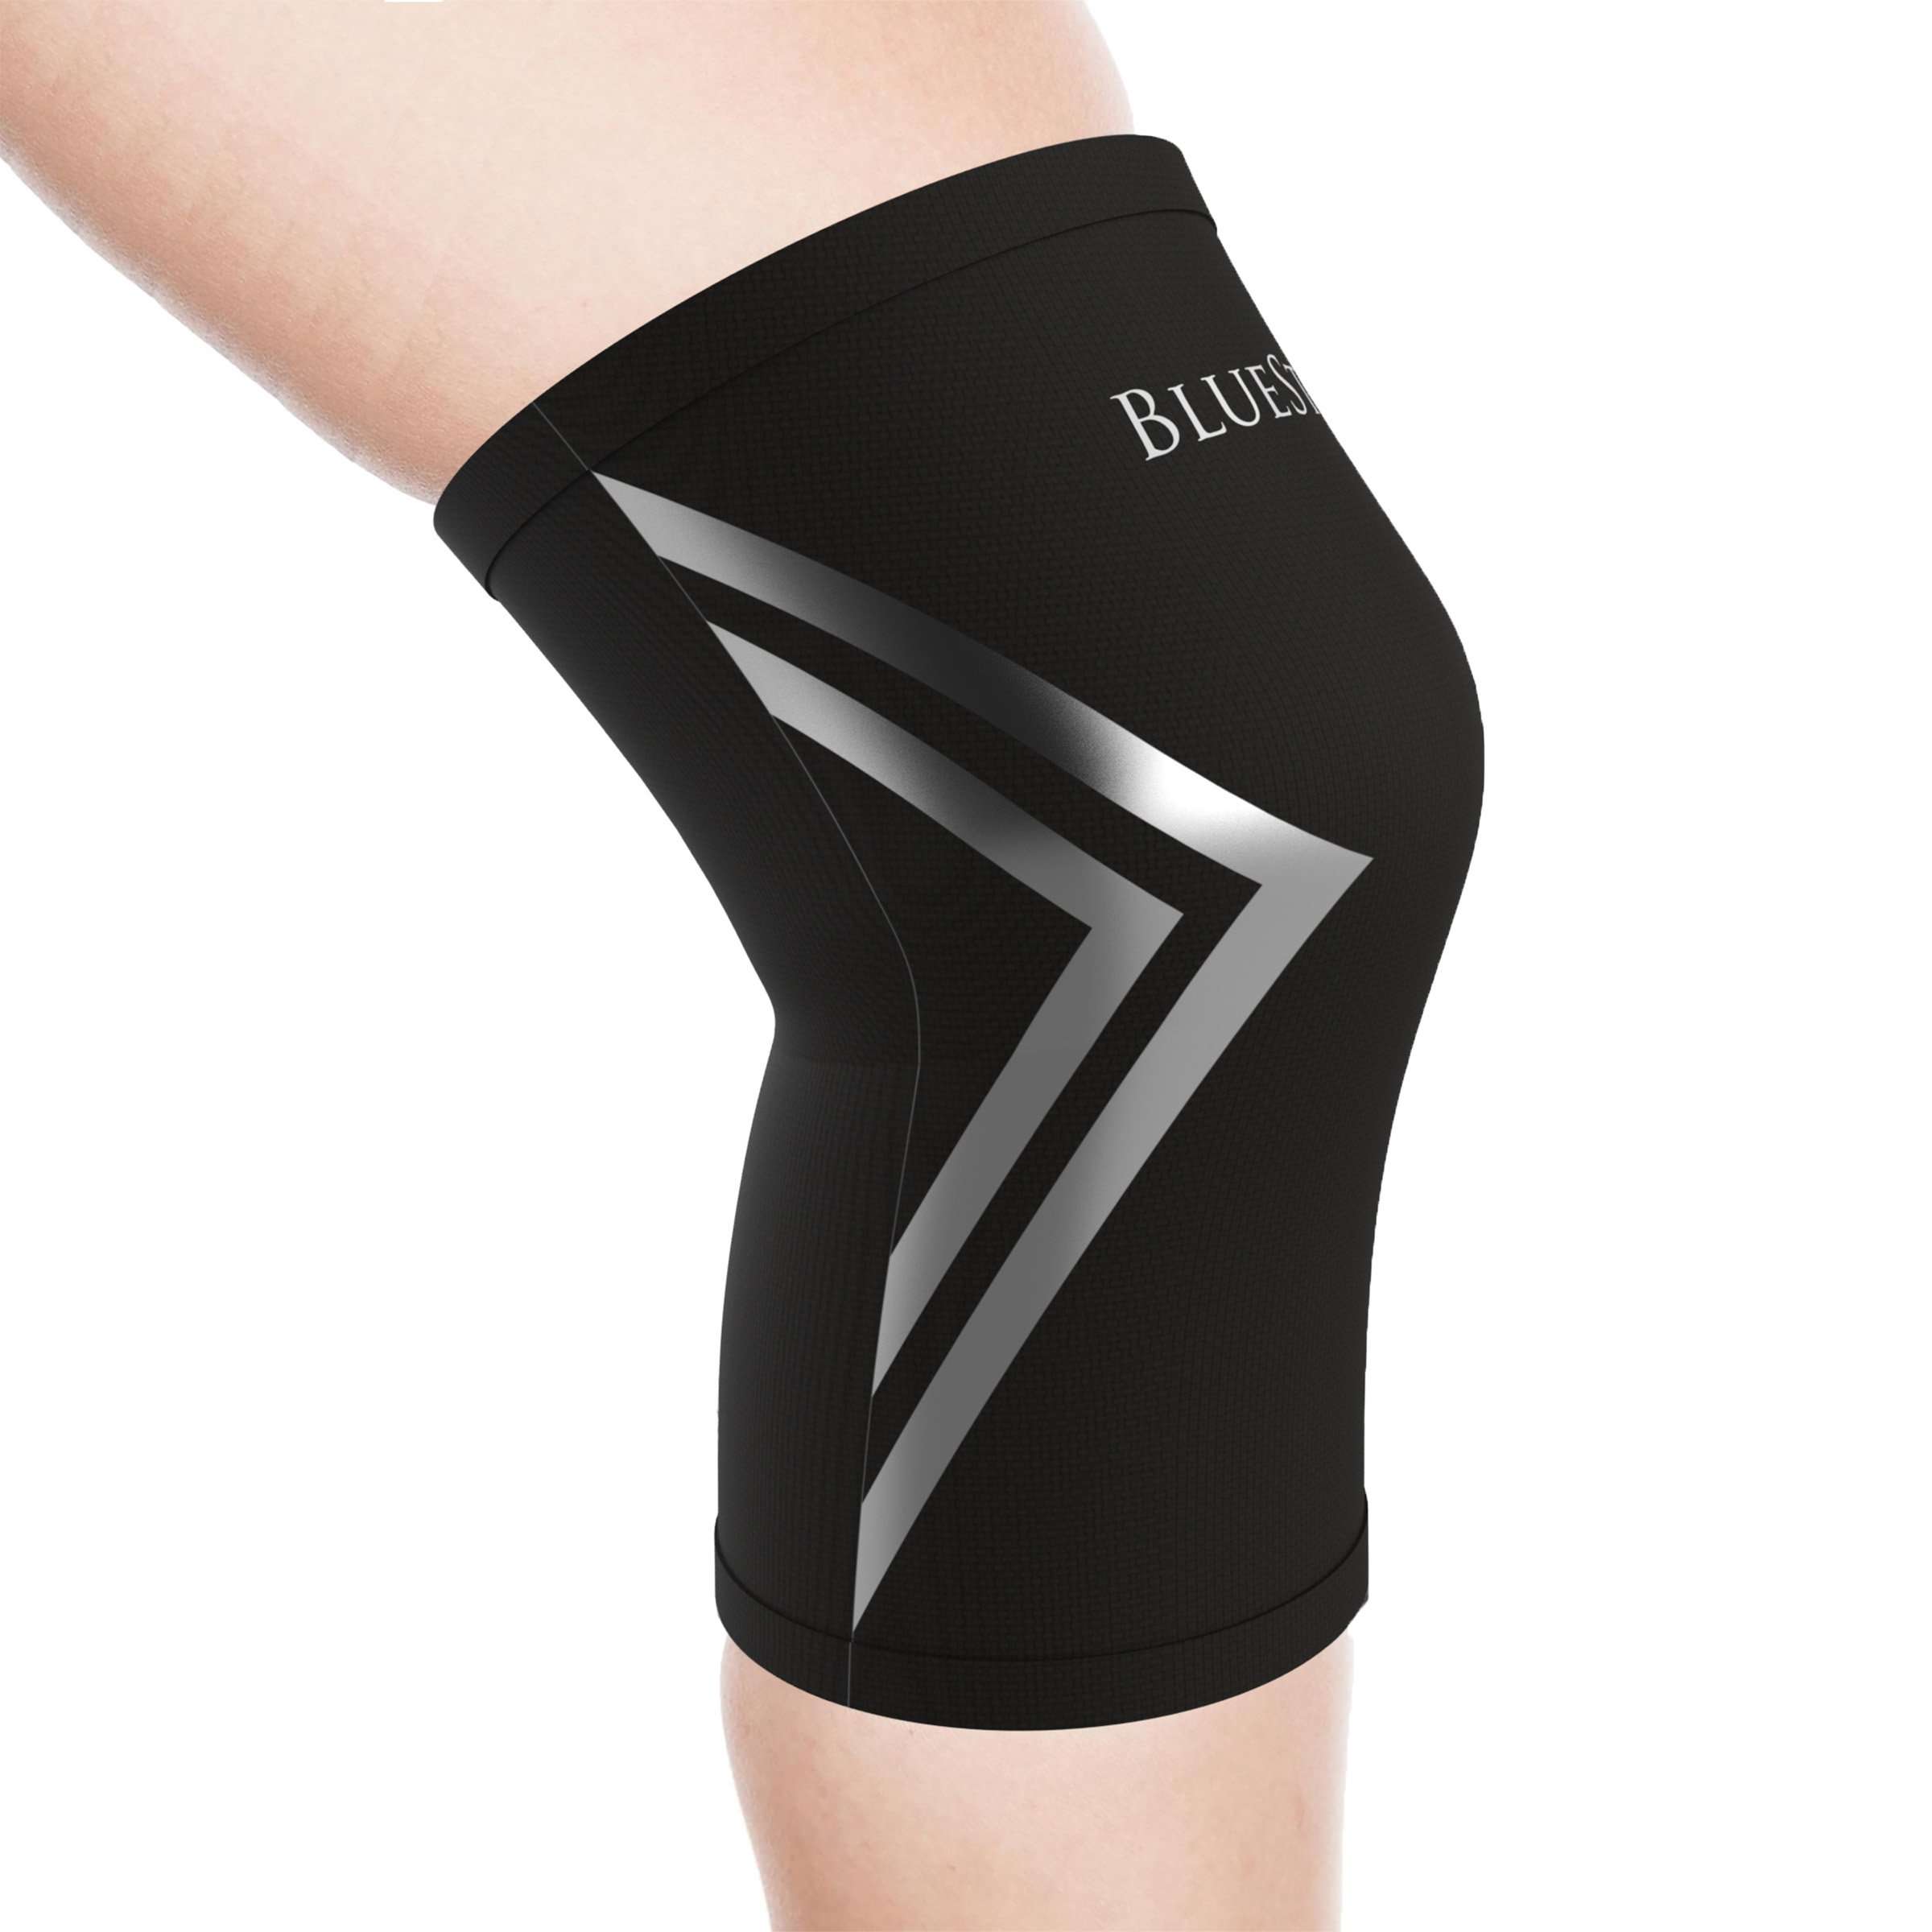 Copper Infused Knee Support Compression Sleeve